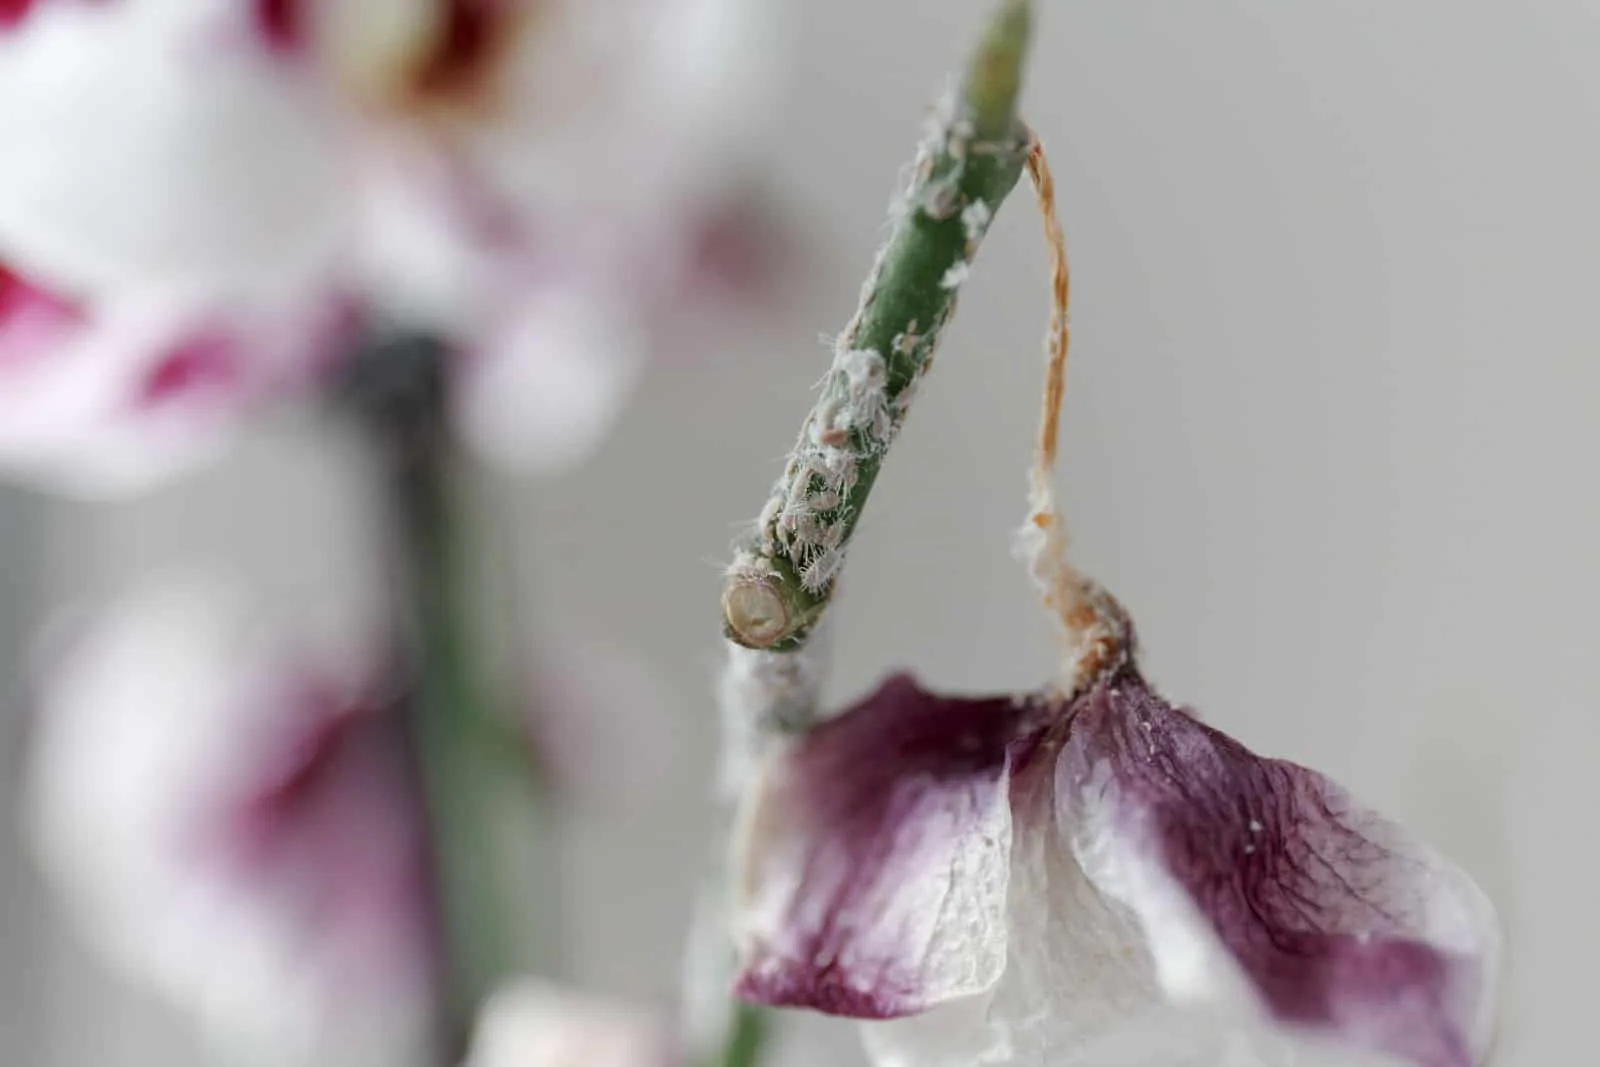 The mealybug that struck the phalaenopsis orchid. Dry dead purple flower.